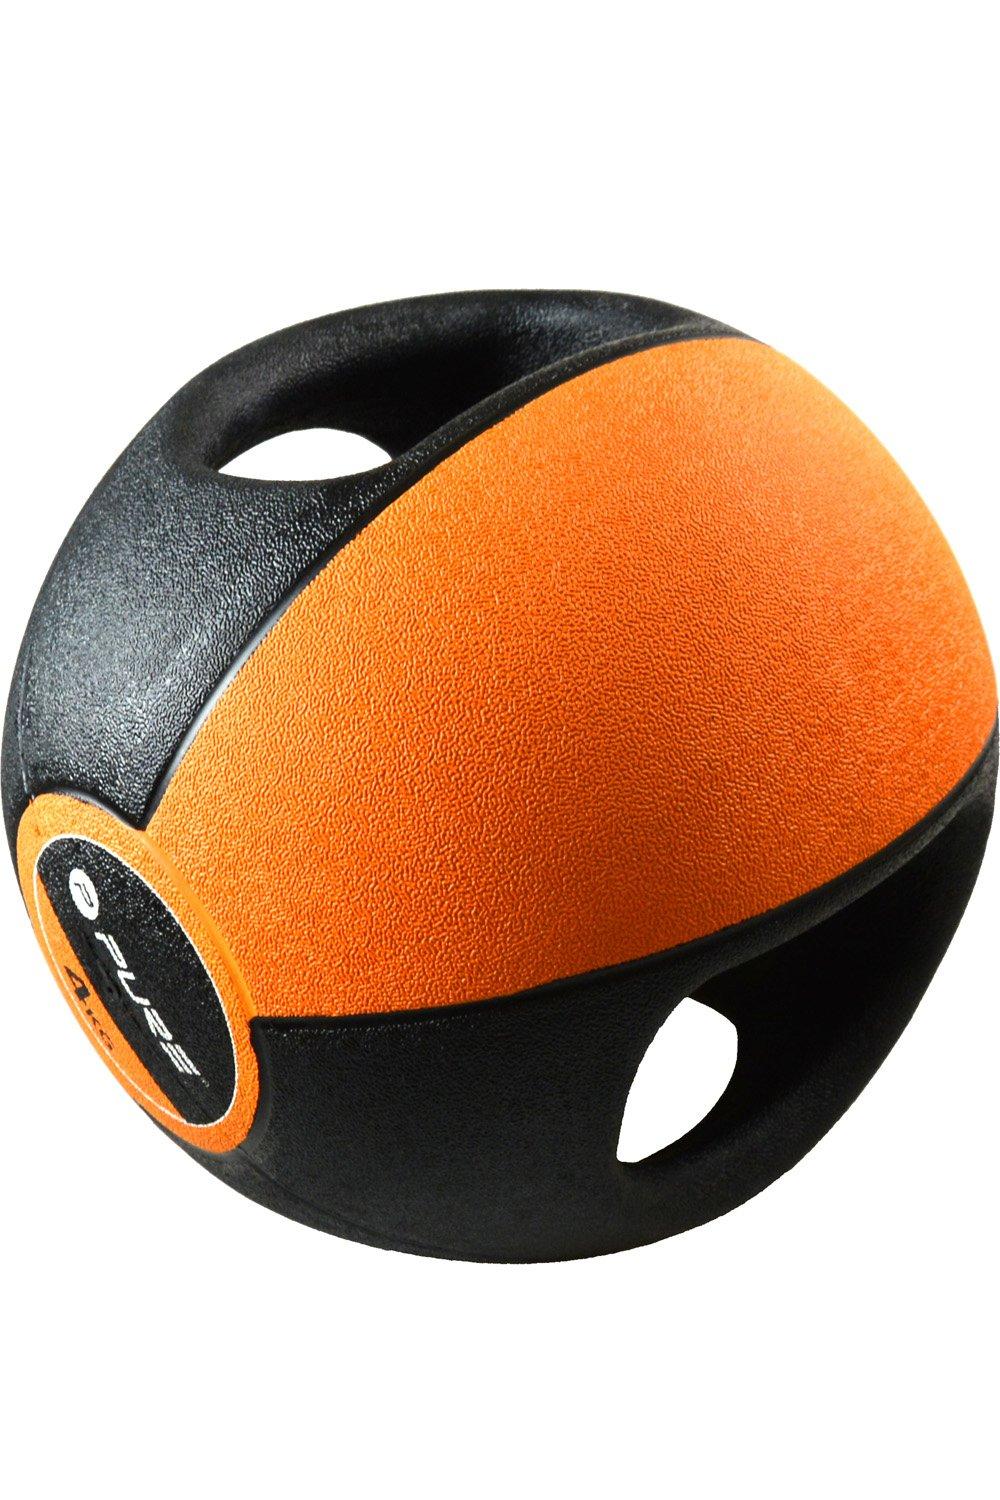 Pure2Improve Bouncing rubber top ball 3kg - Medpoint